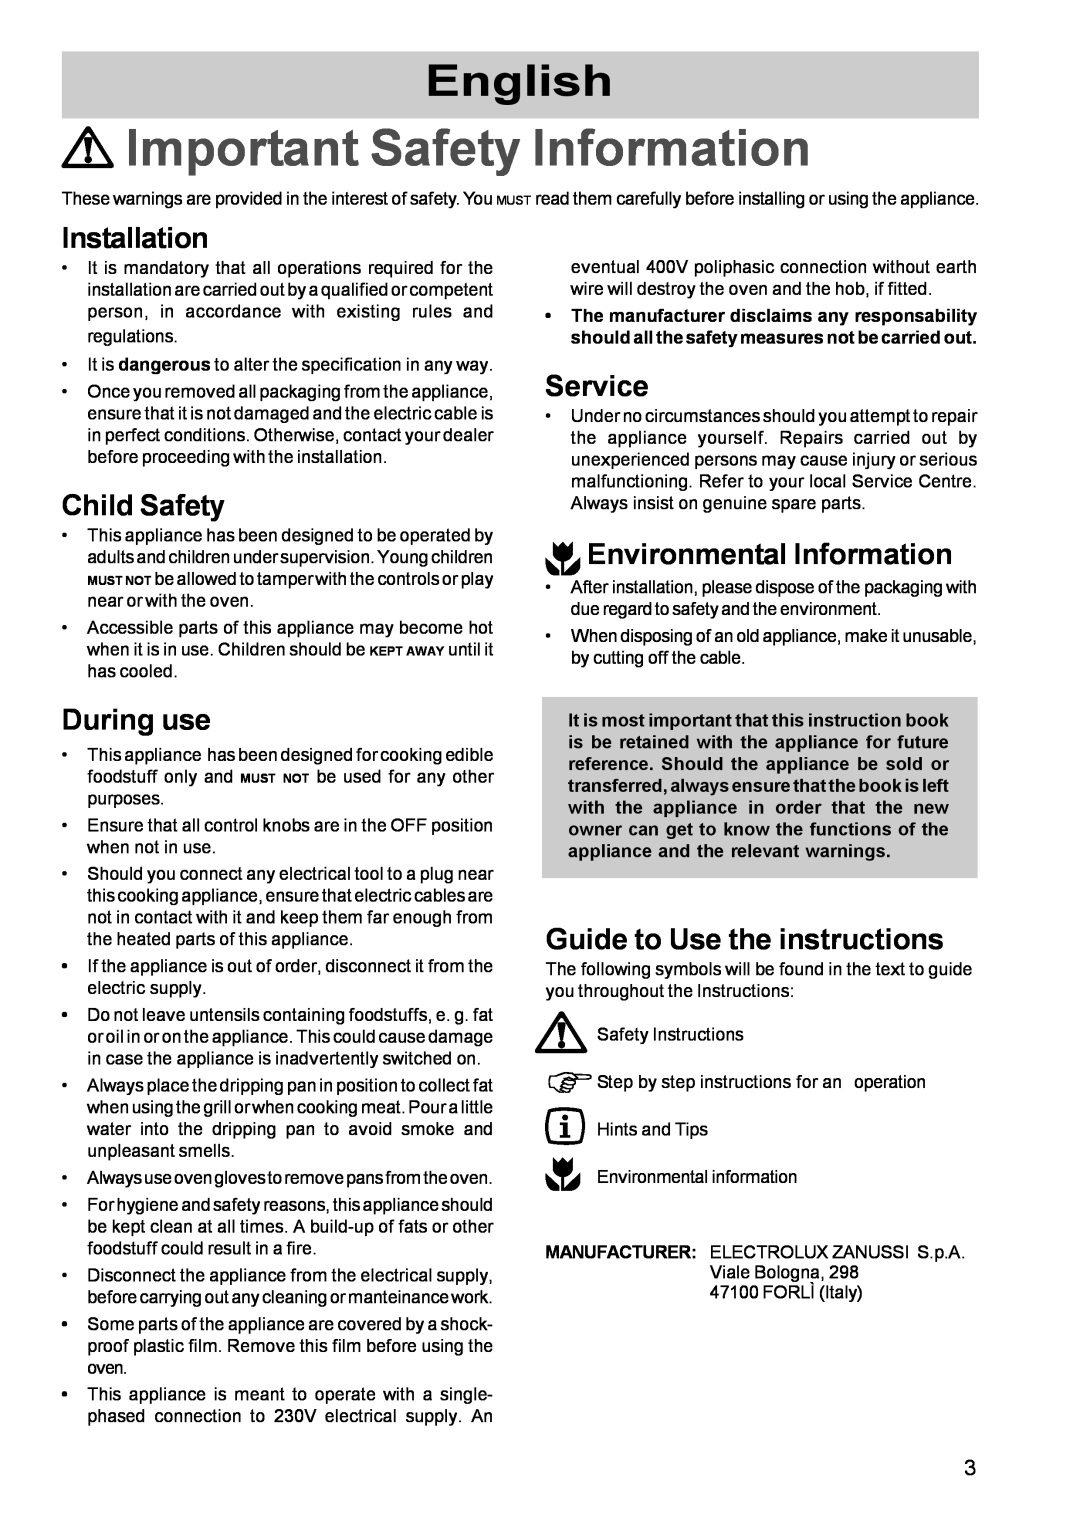 Zanussi Oven Installation, Child Safety, During use, Service, Environmental Information, Guide to Use the instructions 